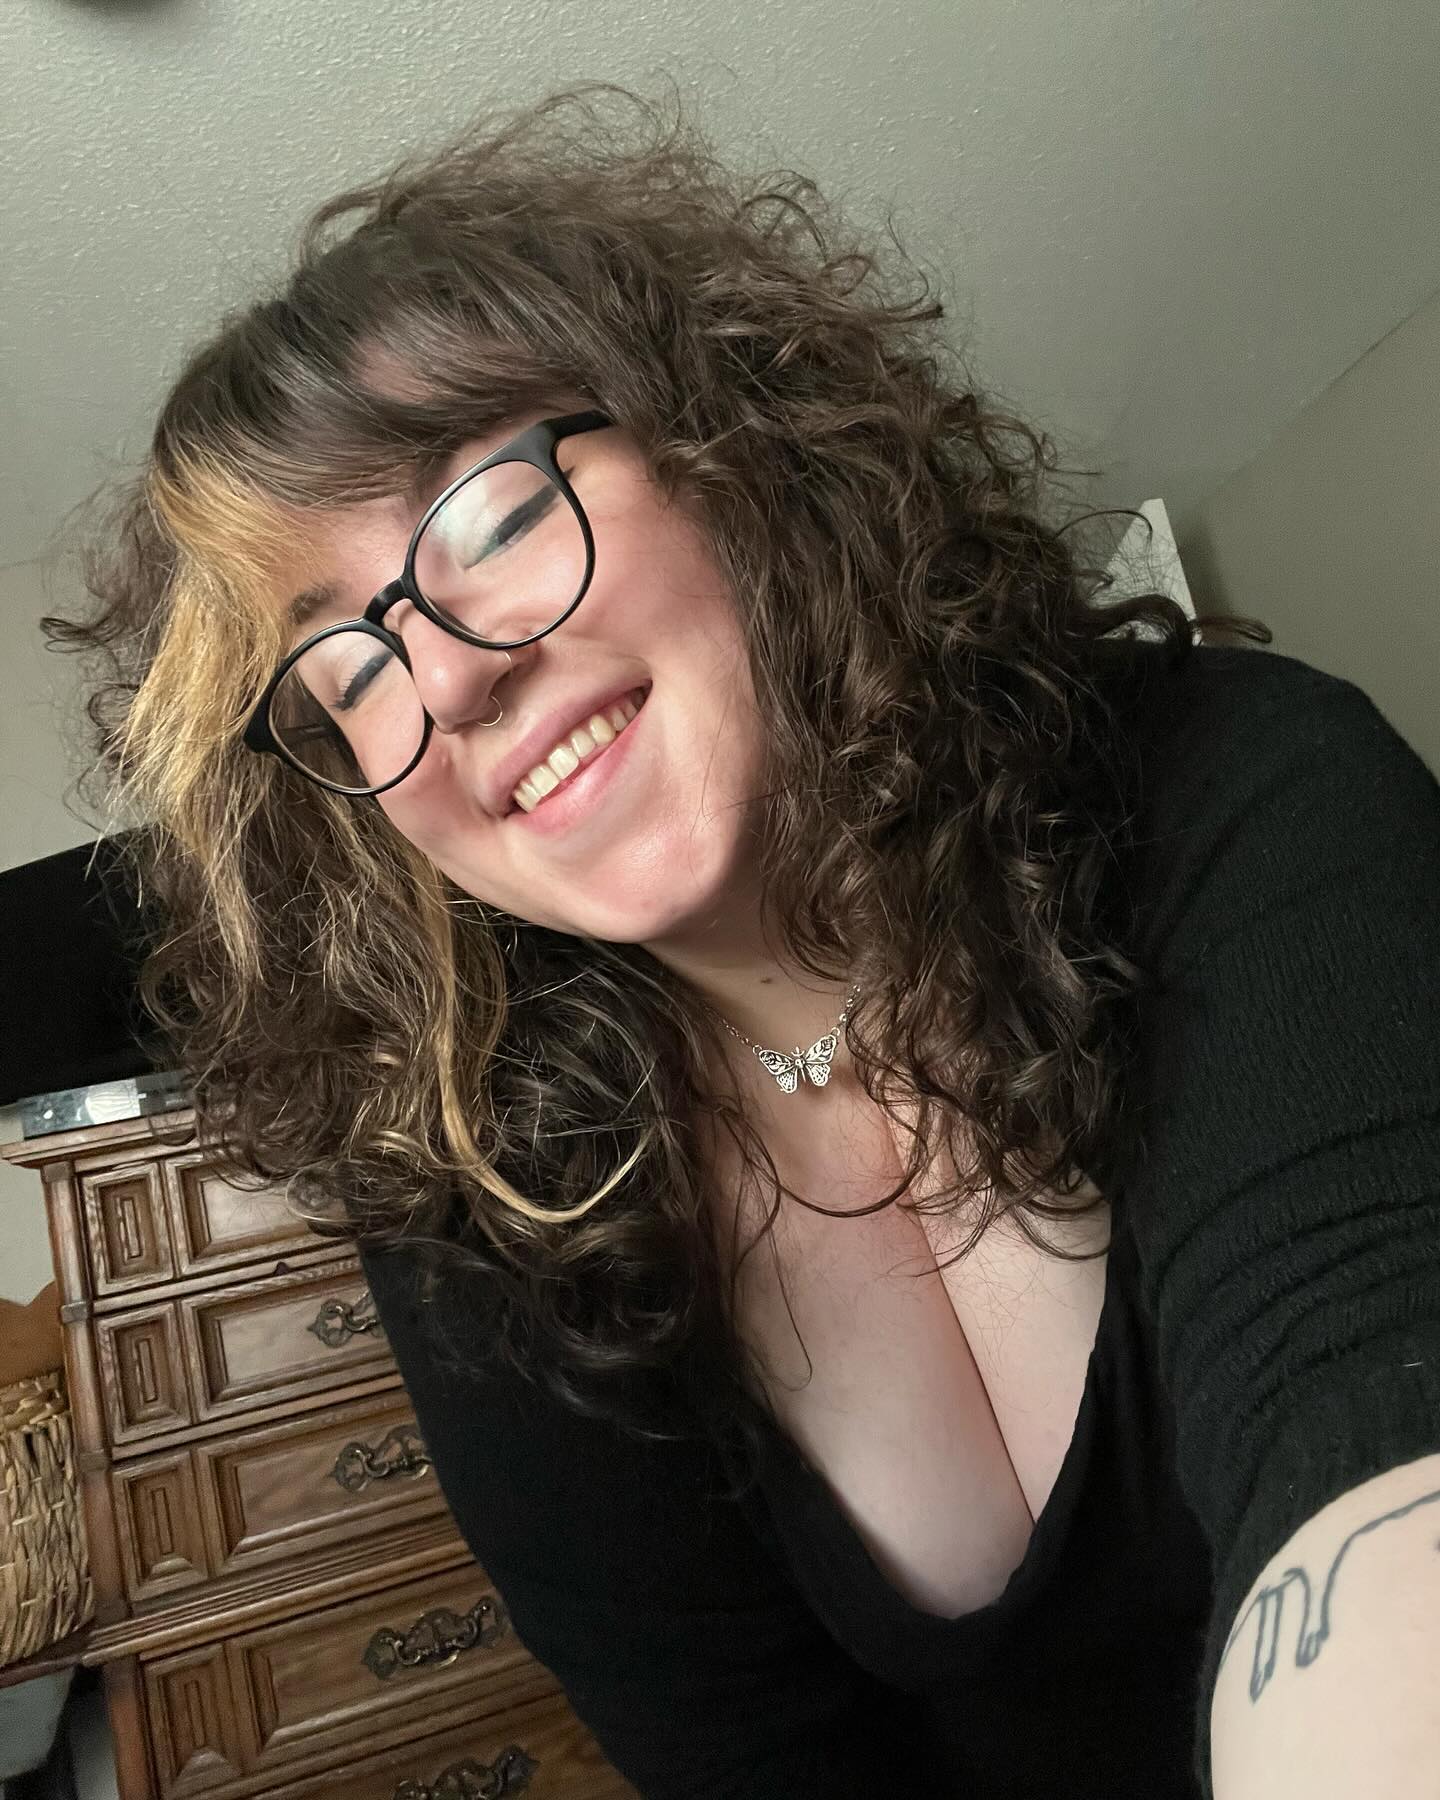 This song is, was, and always will be my favorite song purely because of the movie Stick It 🤣 
/
/
/
#curlyhair #girlswithtattoos #plussizefashion #falloutboy #curlyhairdontcare #girlswithglasses #tongueout #altgirl #alternative